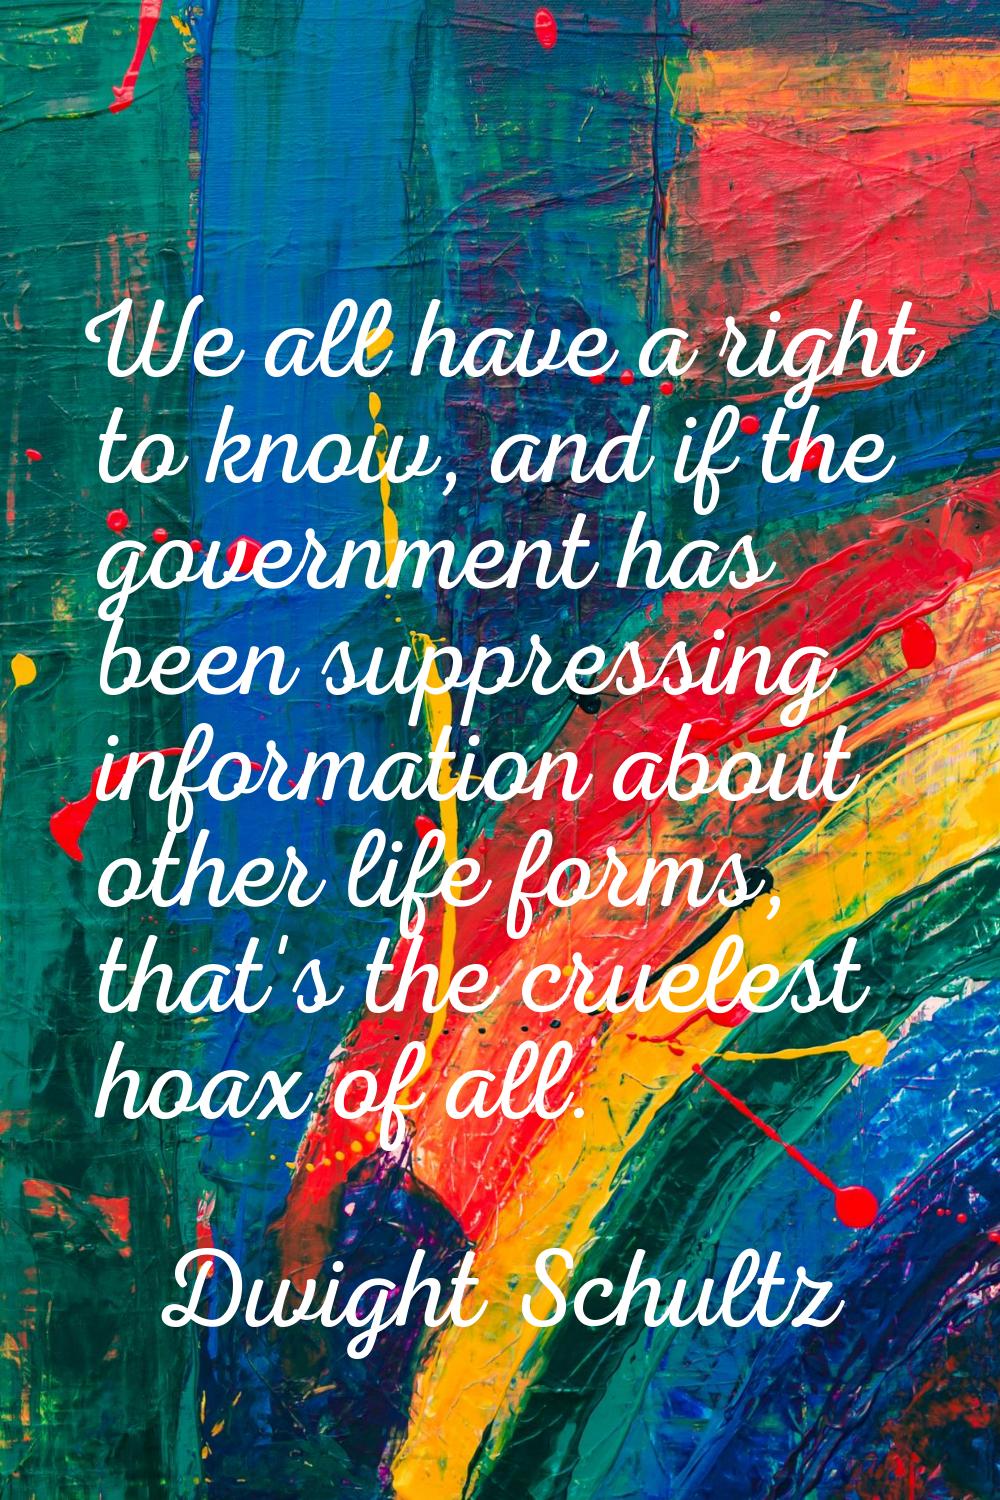 We all have a right to know, and if the government has been suppressing information about other lif